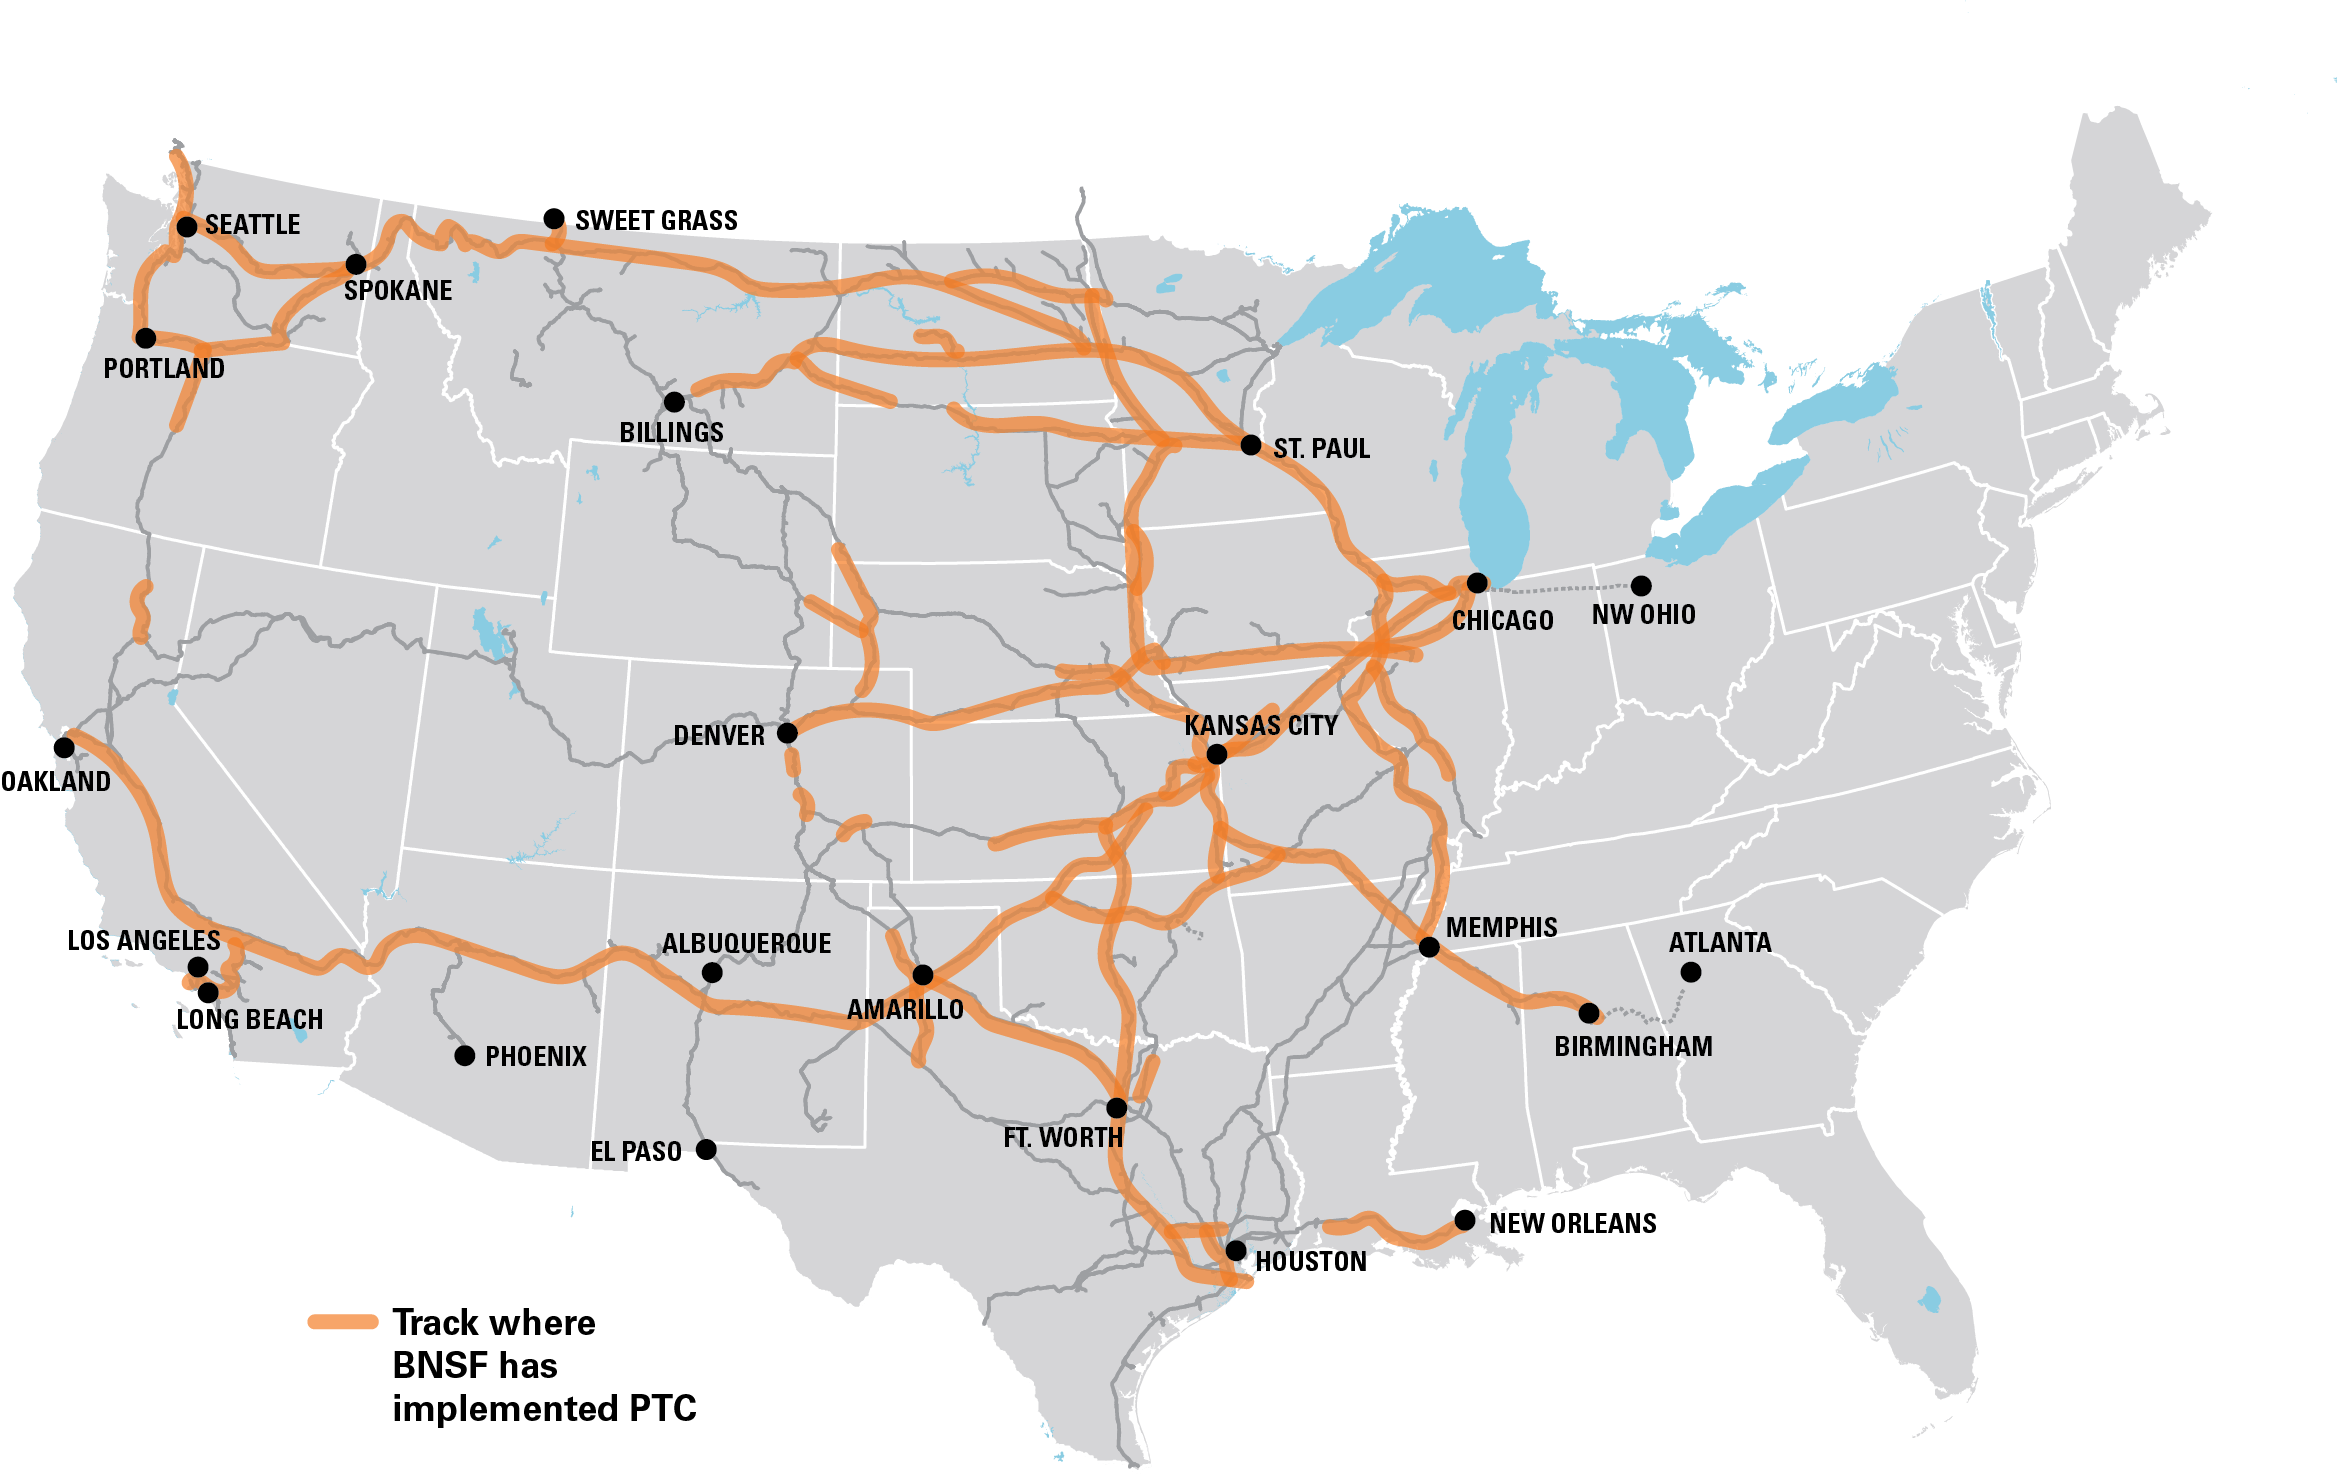 United States Railroad System Map